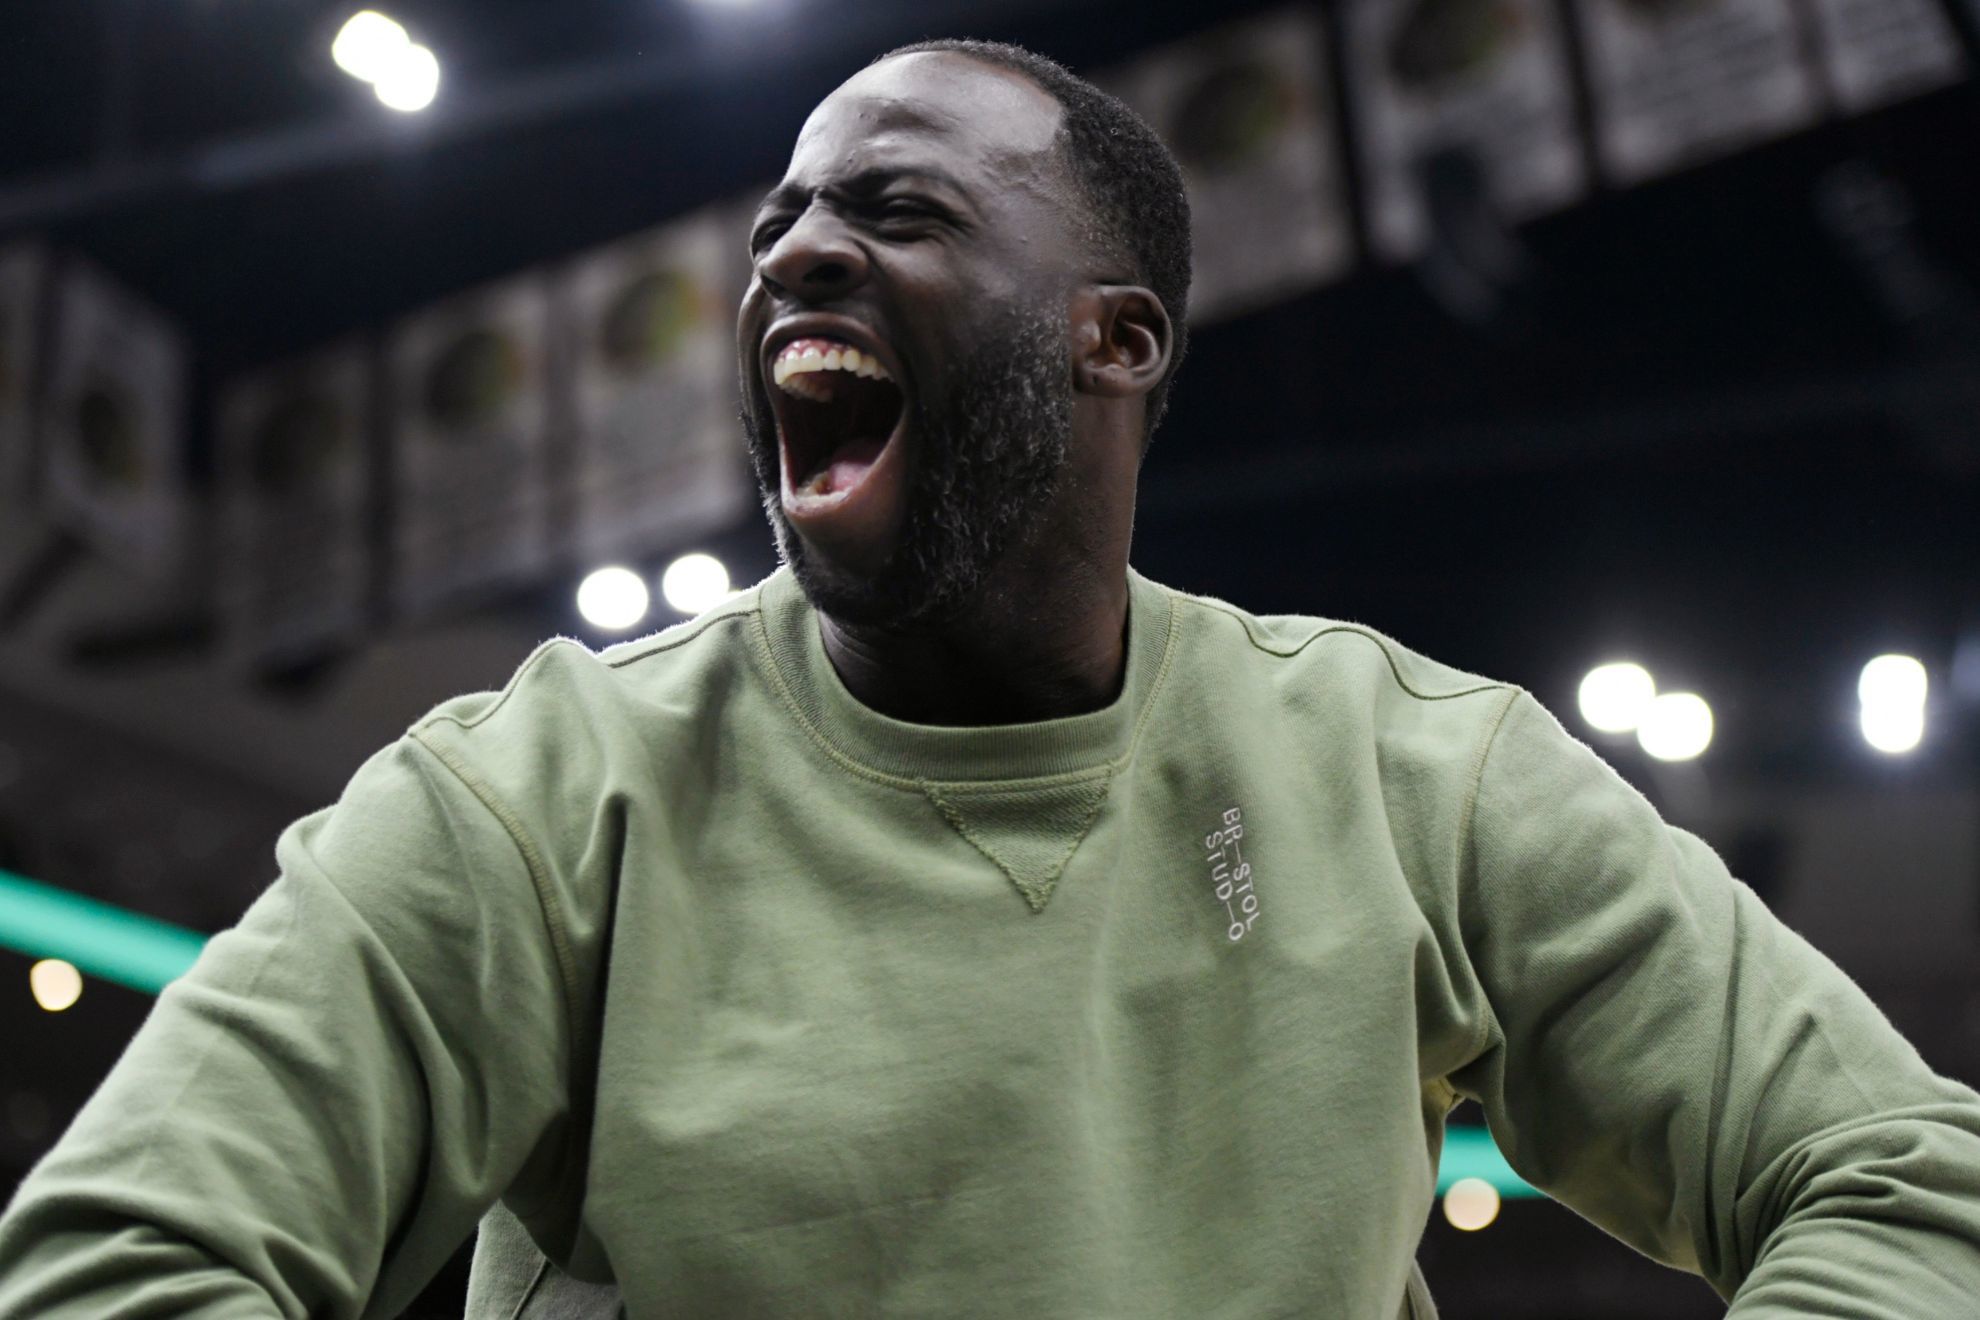 Draymond Green expected to make his return from suspension against Grizzlies